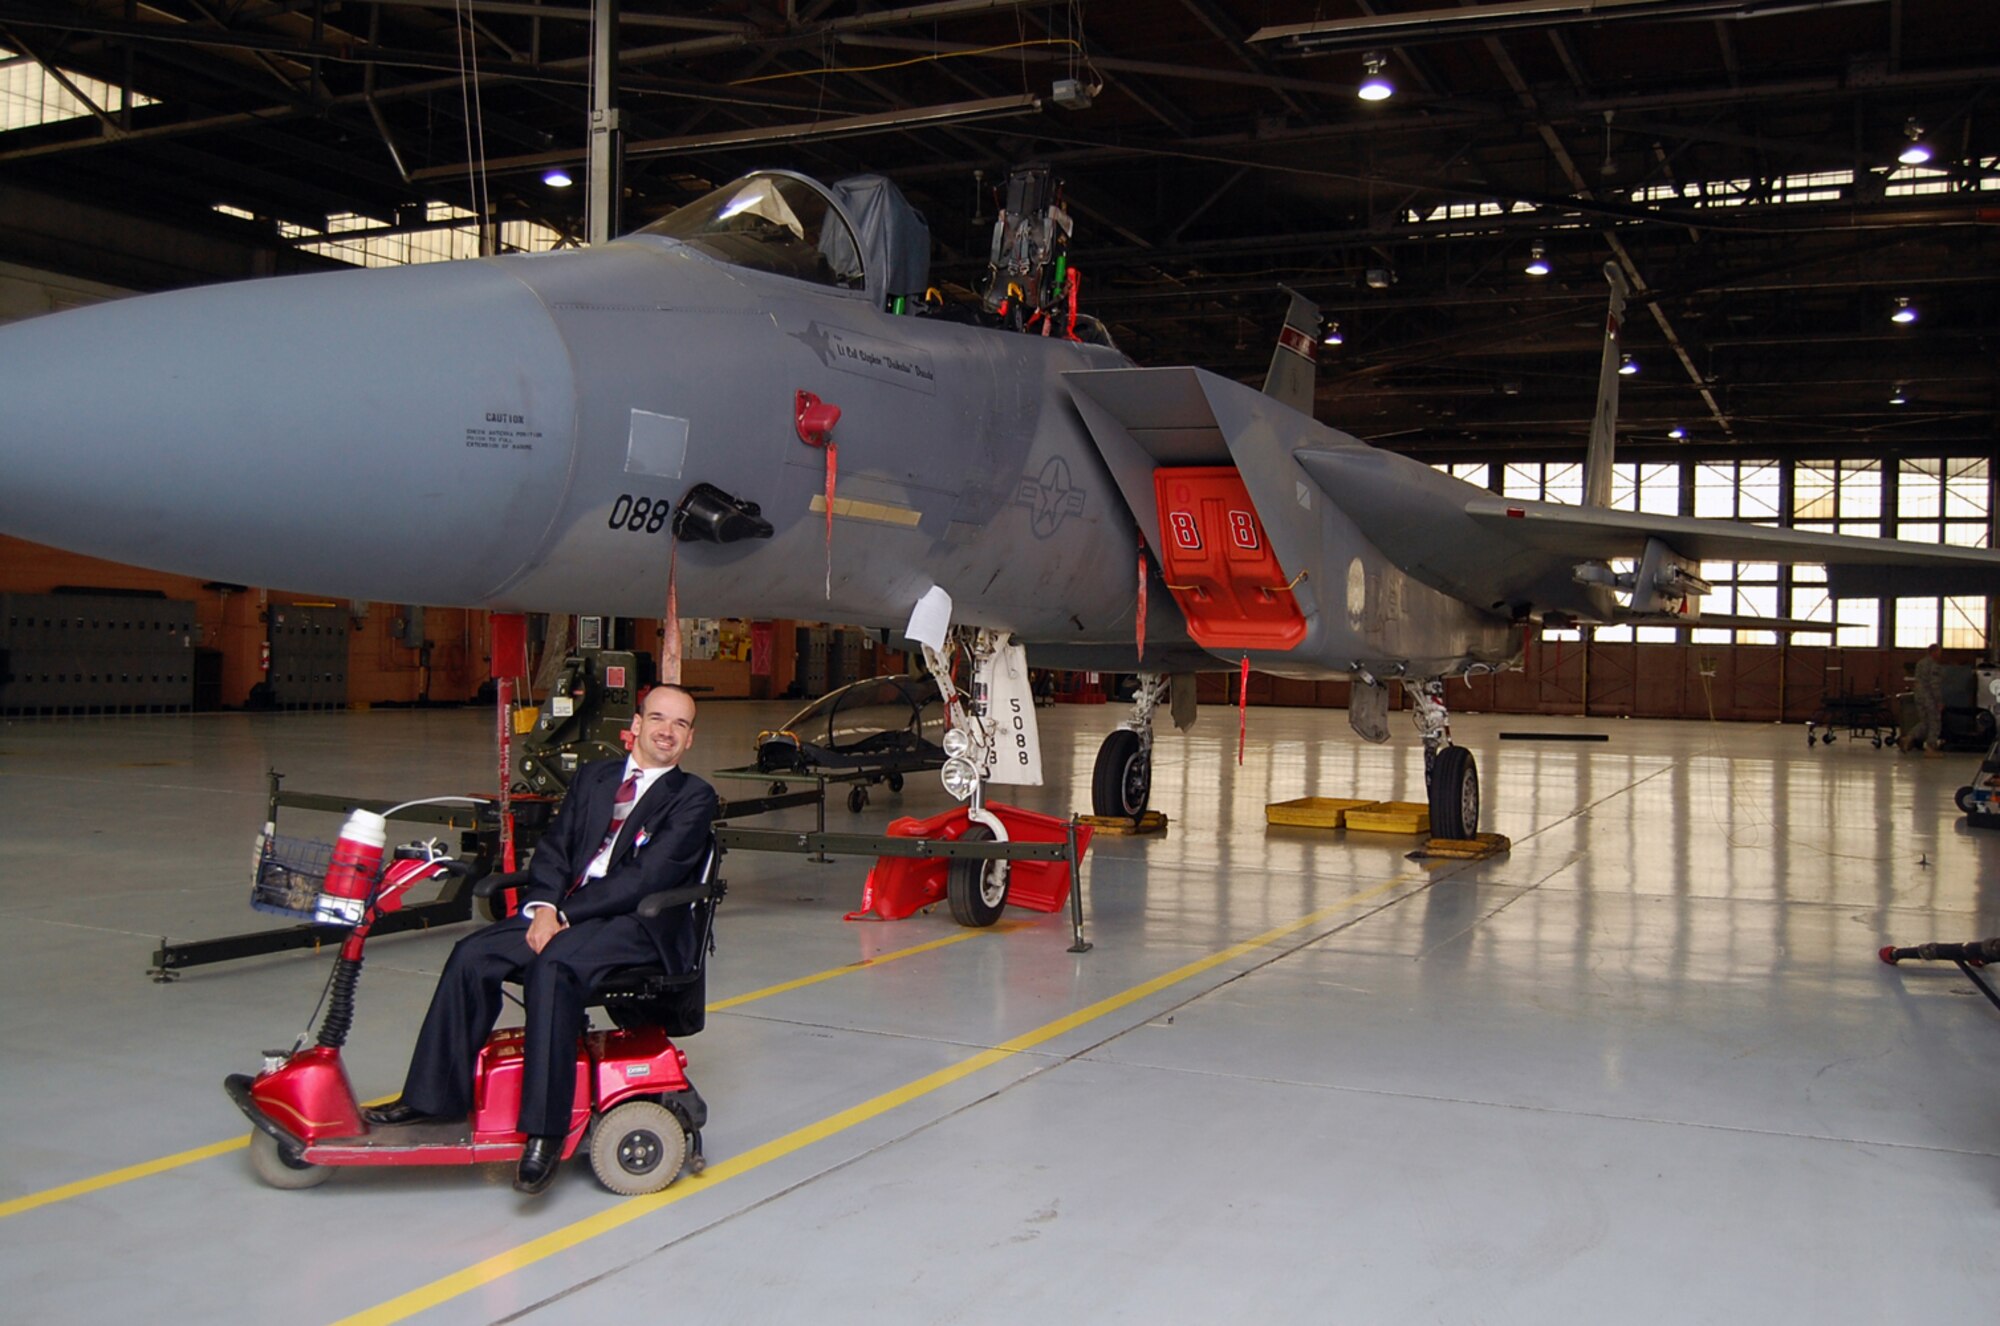 Willie "Wild Man" Deuster takes a time out from his tour of the F-15 to pose with the aircraft.  Deuster was the guest for the Brown Bag Speaker Series May 3.